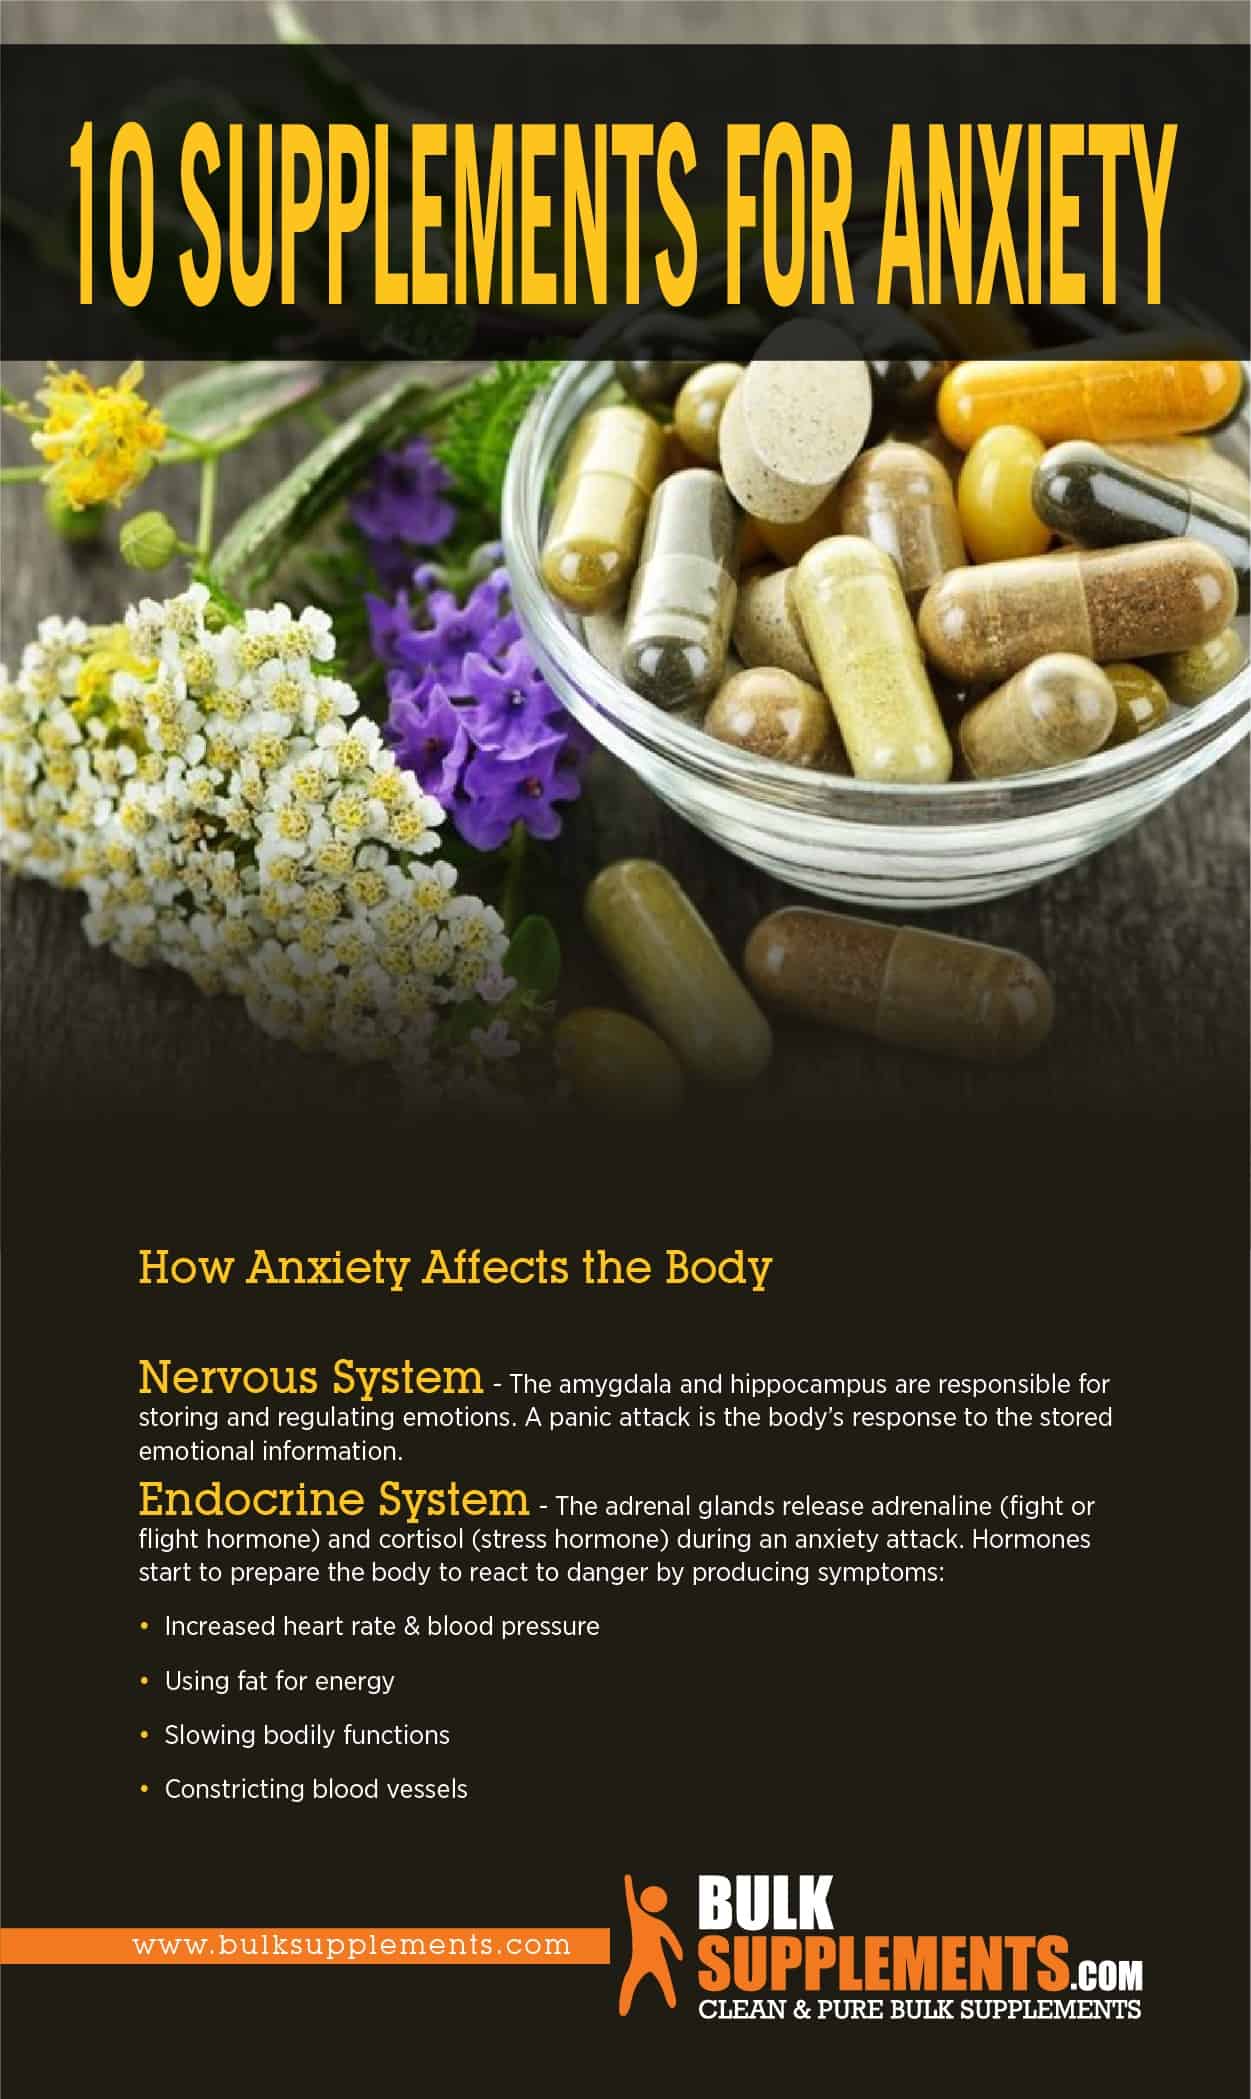 Supplements for Anxiety